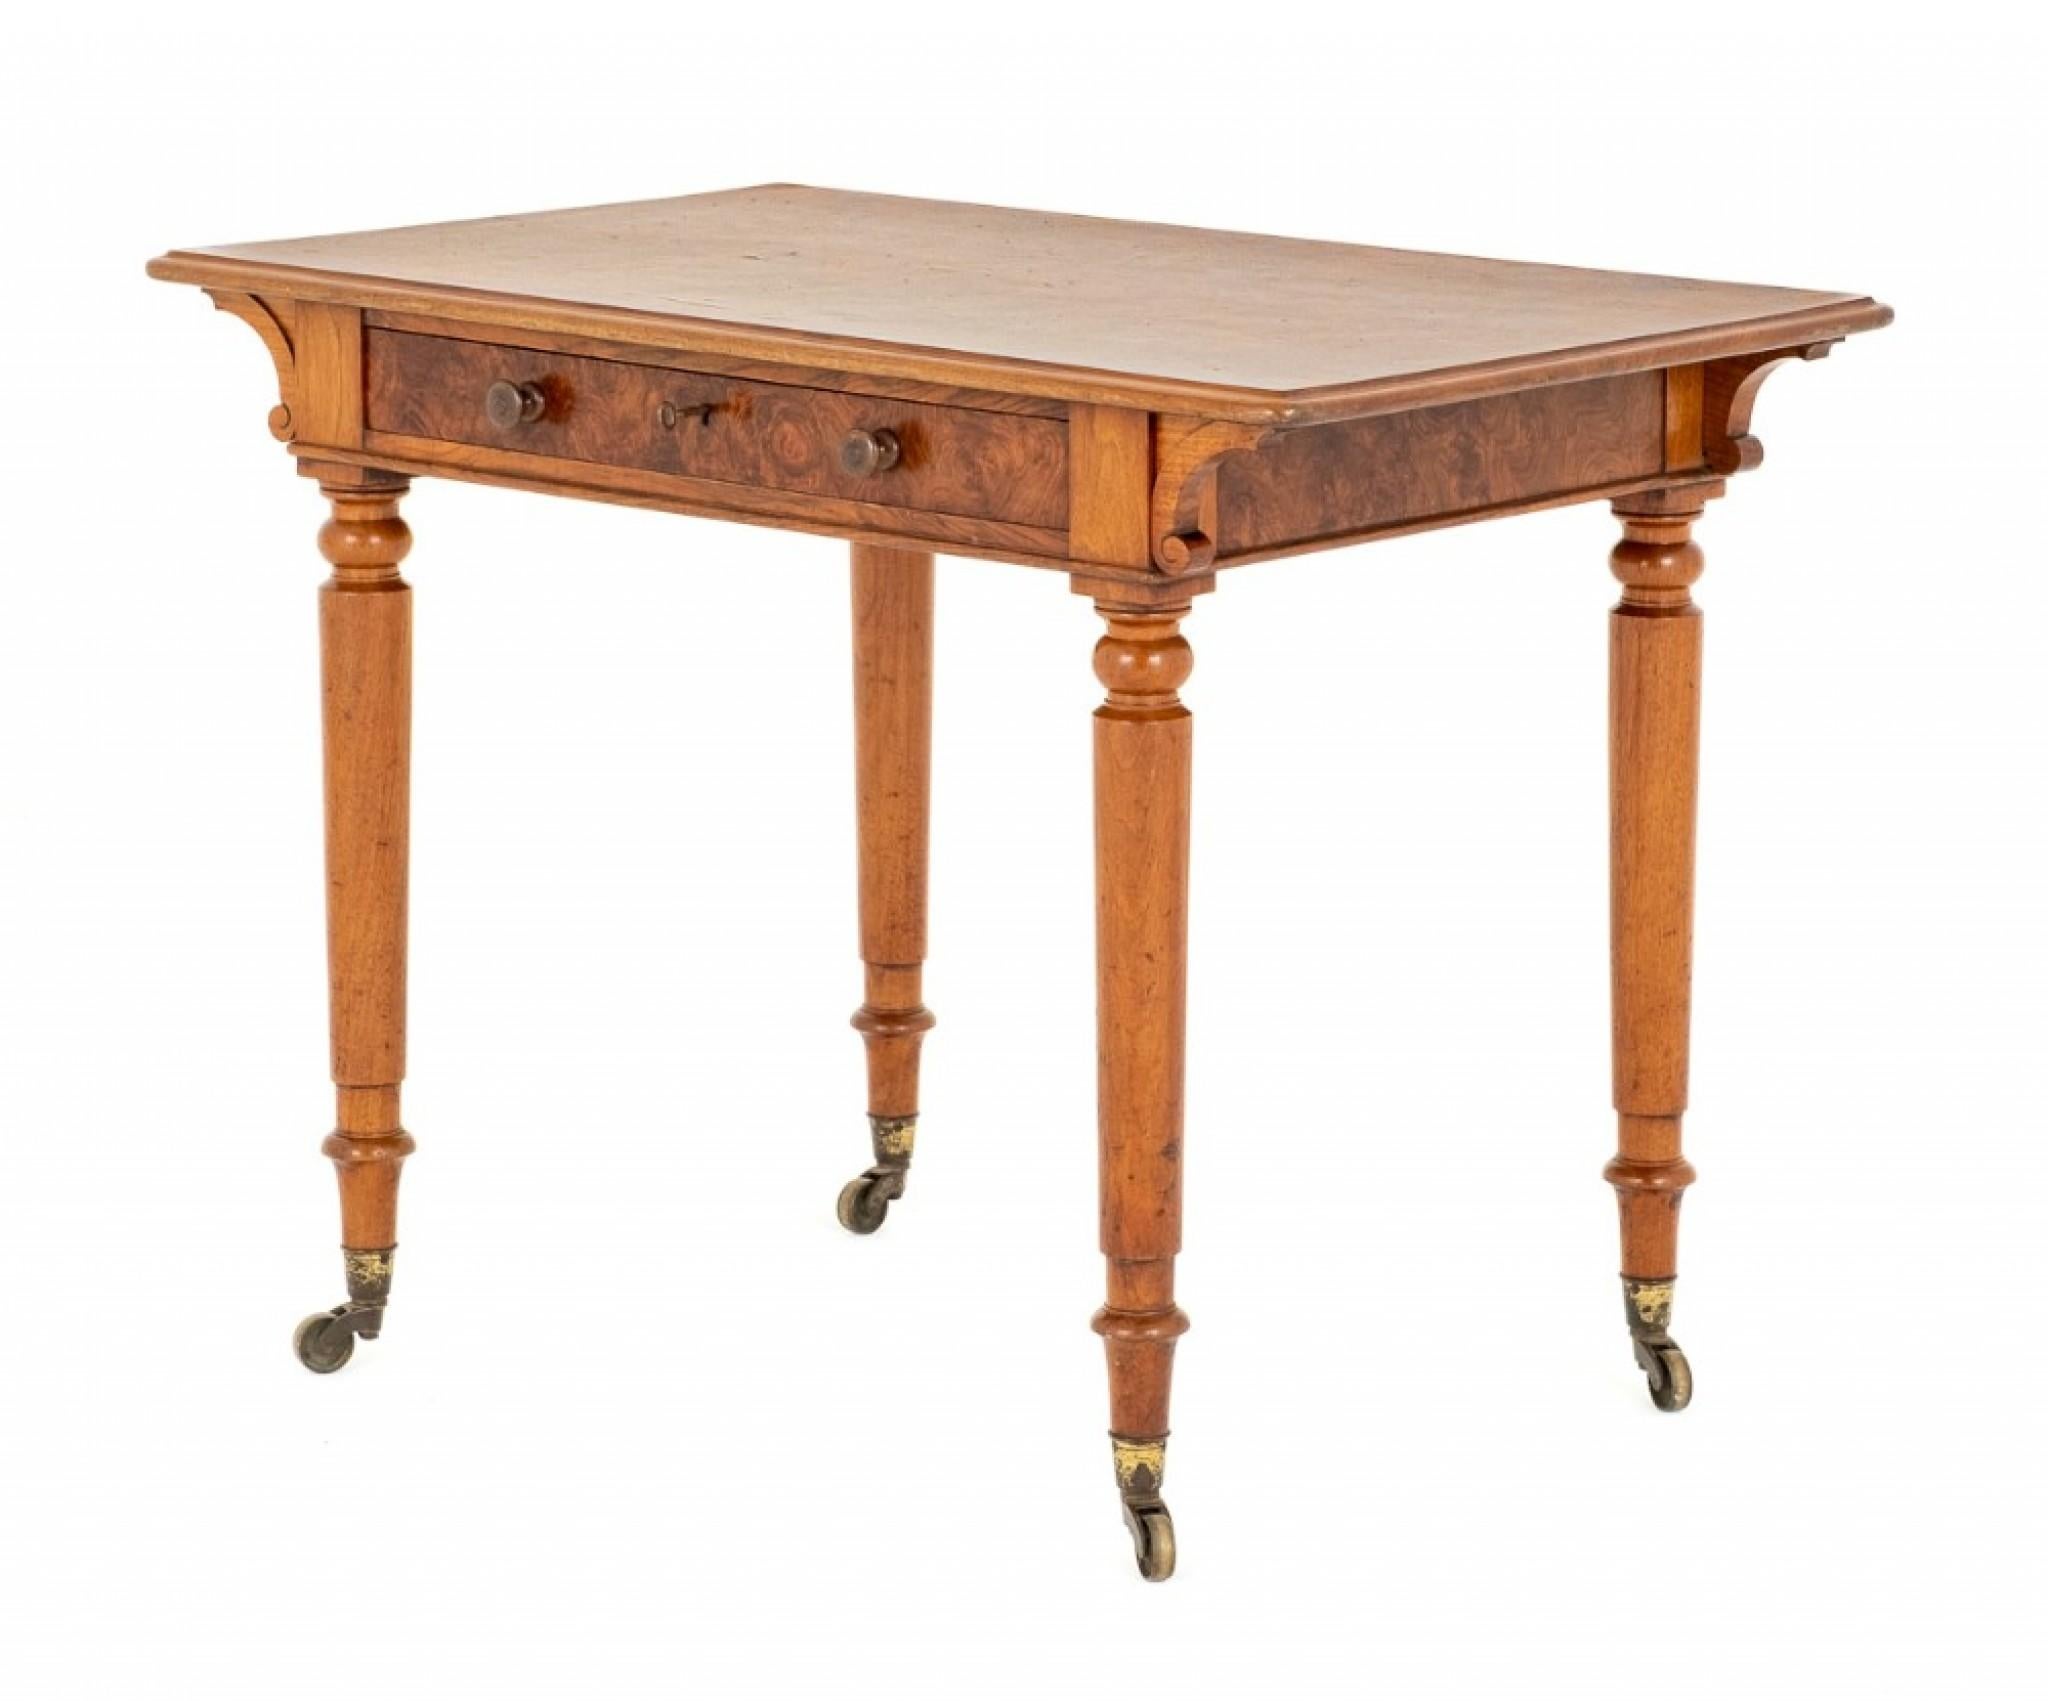 Burr Walnut Side Table (Holland and Co)
circa 1870
This Quality Table is Raised upon Crisp Ring Turned Legs with Brass Castors.
The Table Features 1 x Mahogany Lined Drawer with the Stamp of Holland and Co.
The Top of the Table Having Wonderful